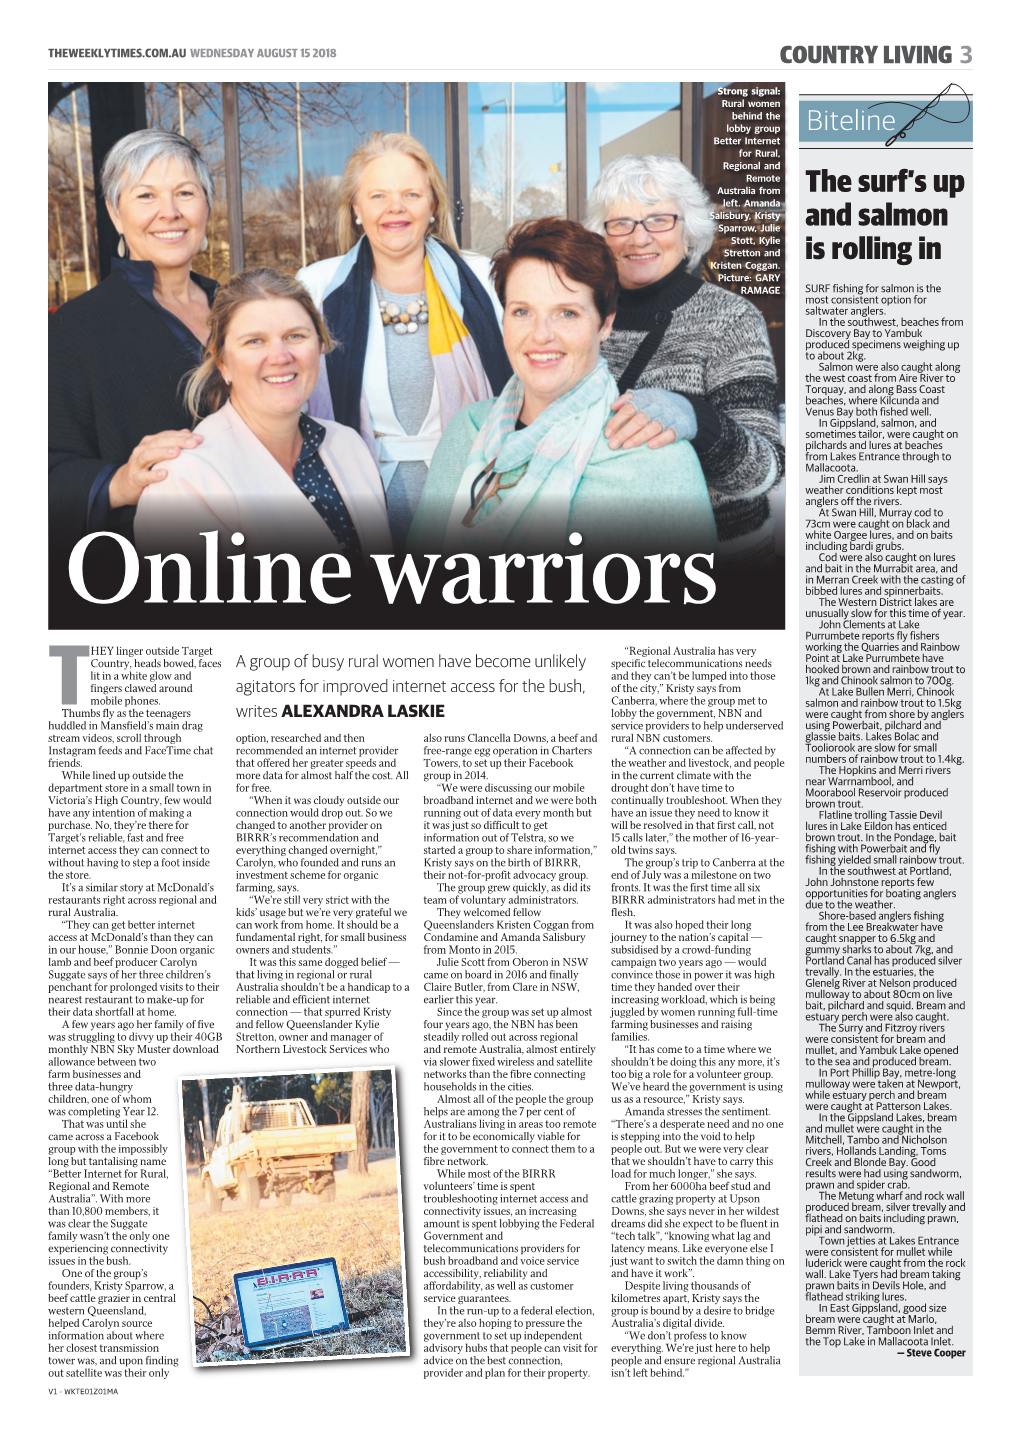 Online Warriors Unusually Slow for This Time of Year